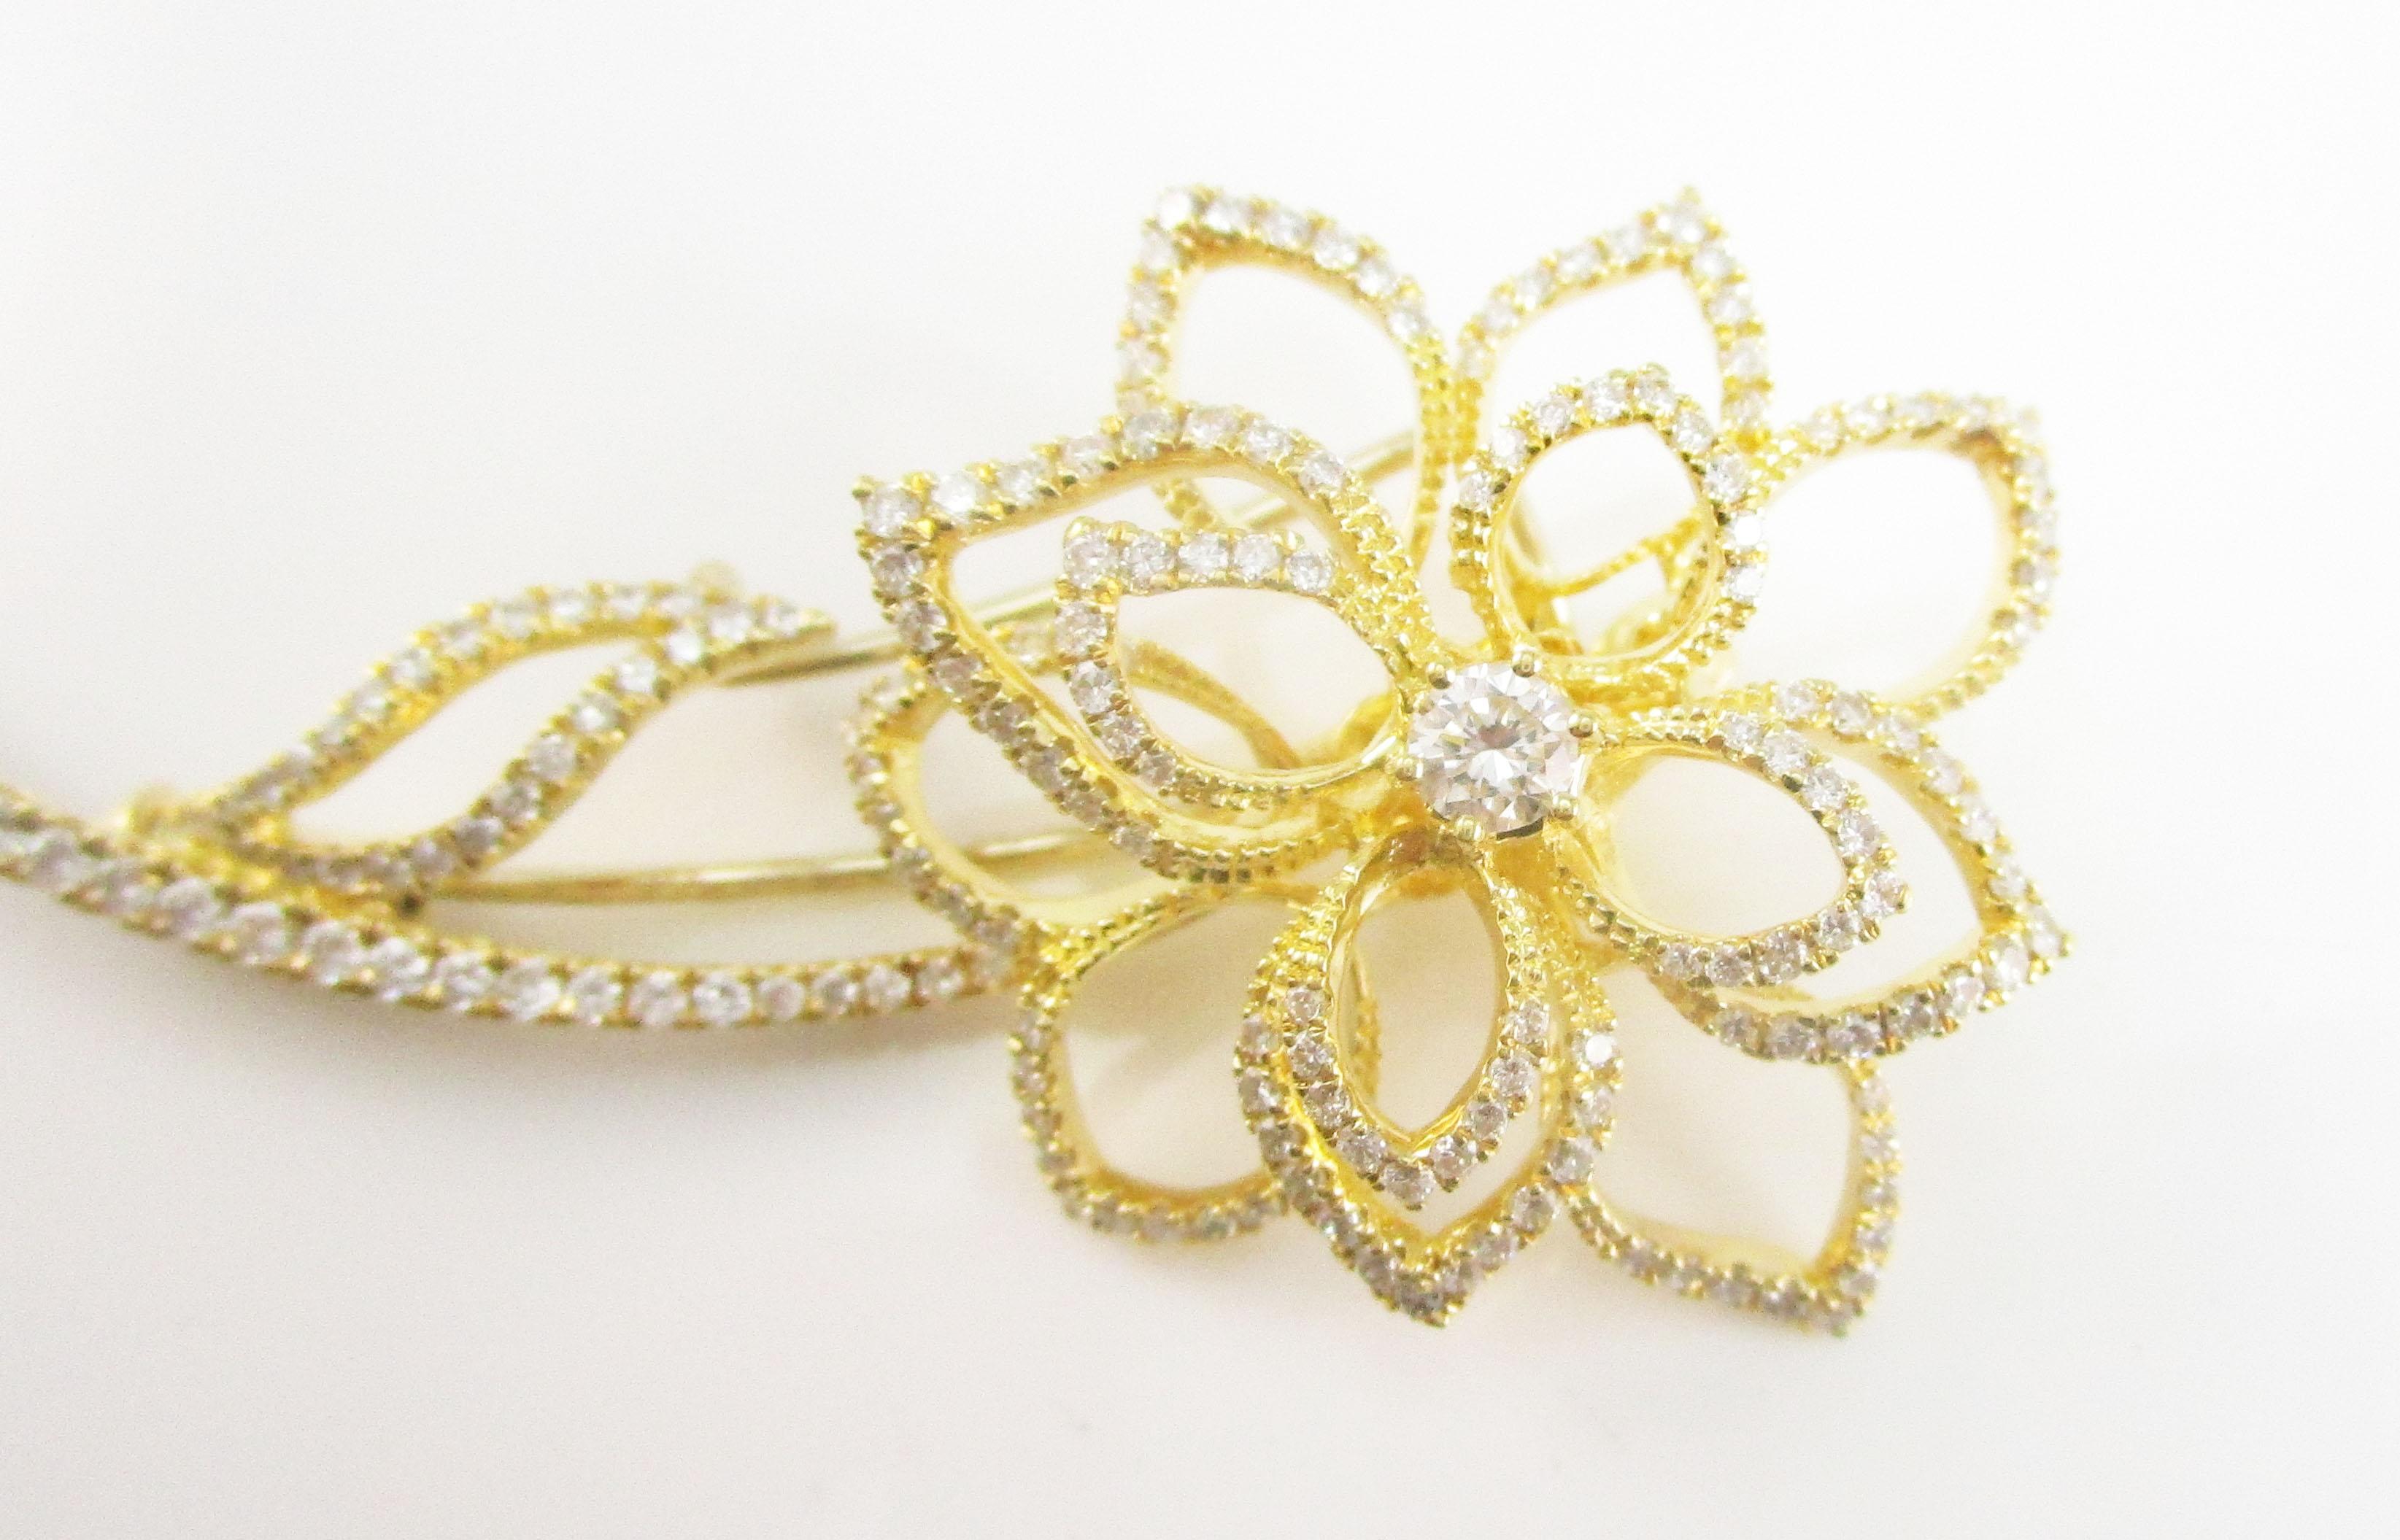 18 Karat Yellow Gold Diamond Flower Brooch In Excellent Condition For Sale In Lexington, KY